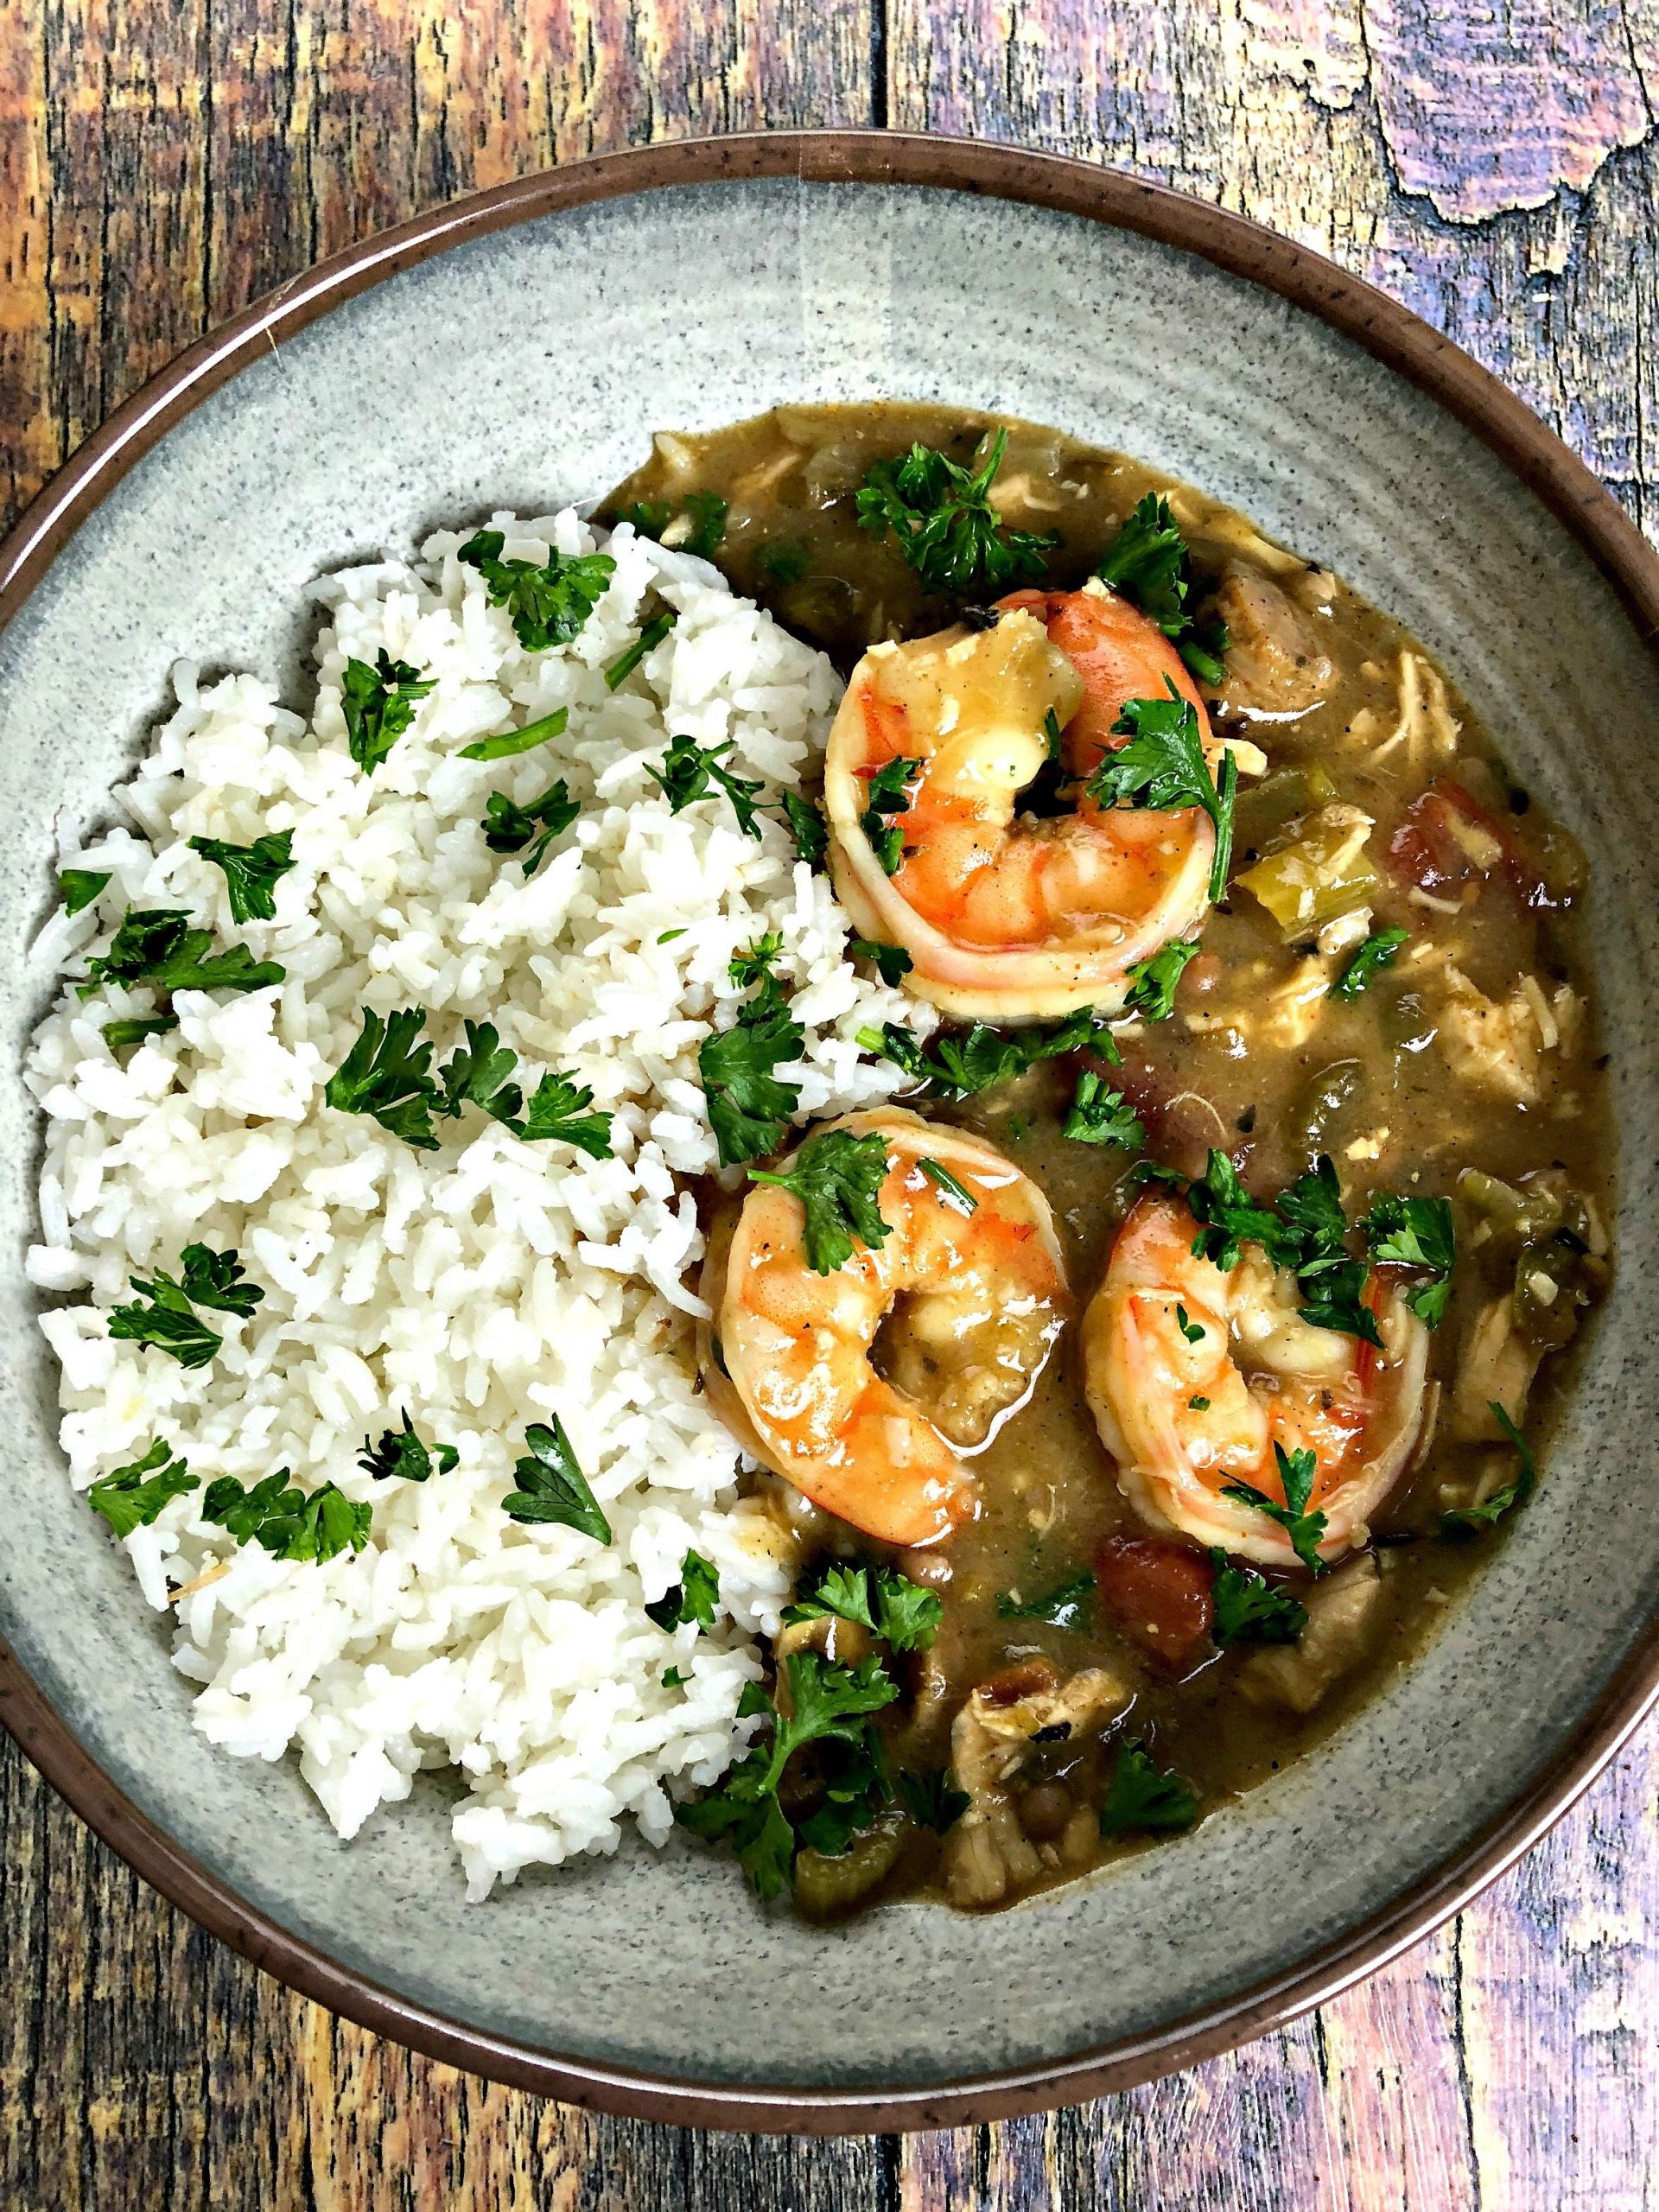 Gumbo Recipe Seafood Chicken And Sausage
 Instant Pot Louisiana Seafood Chicken and Sausage Gumbo